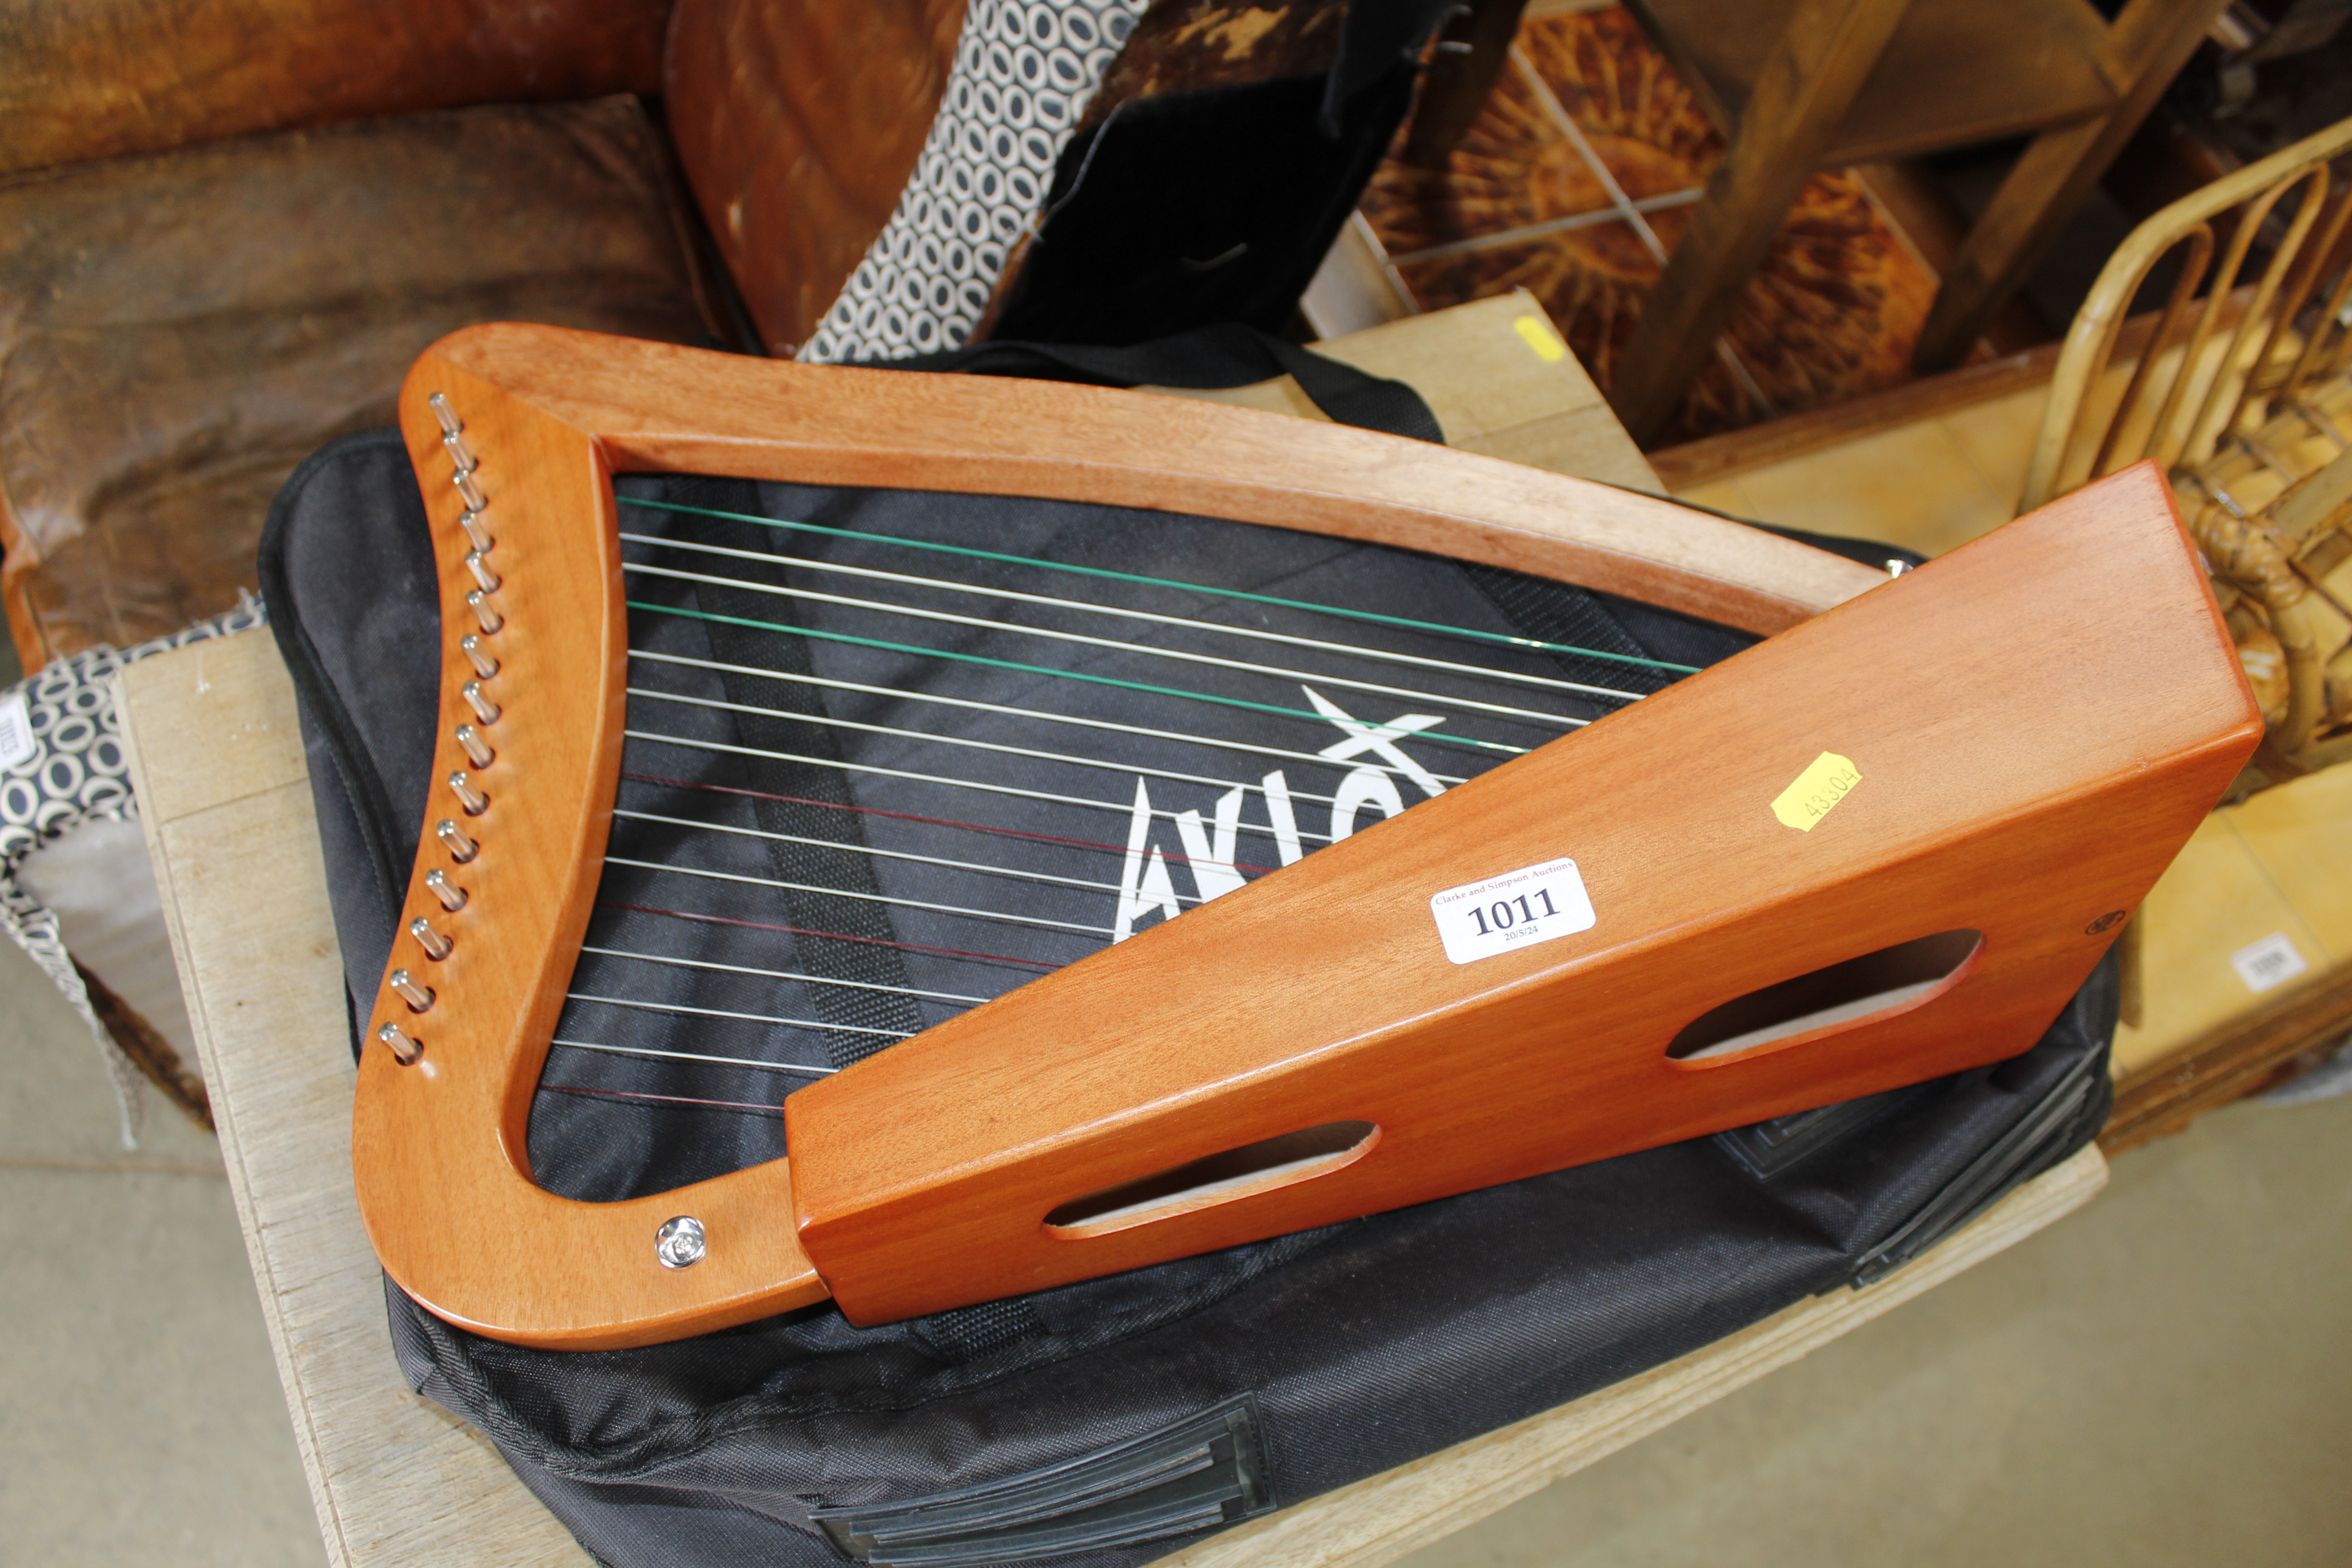 An Alclot harp with carry case